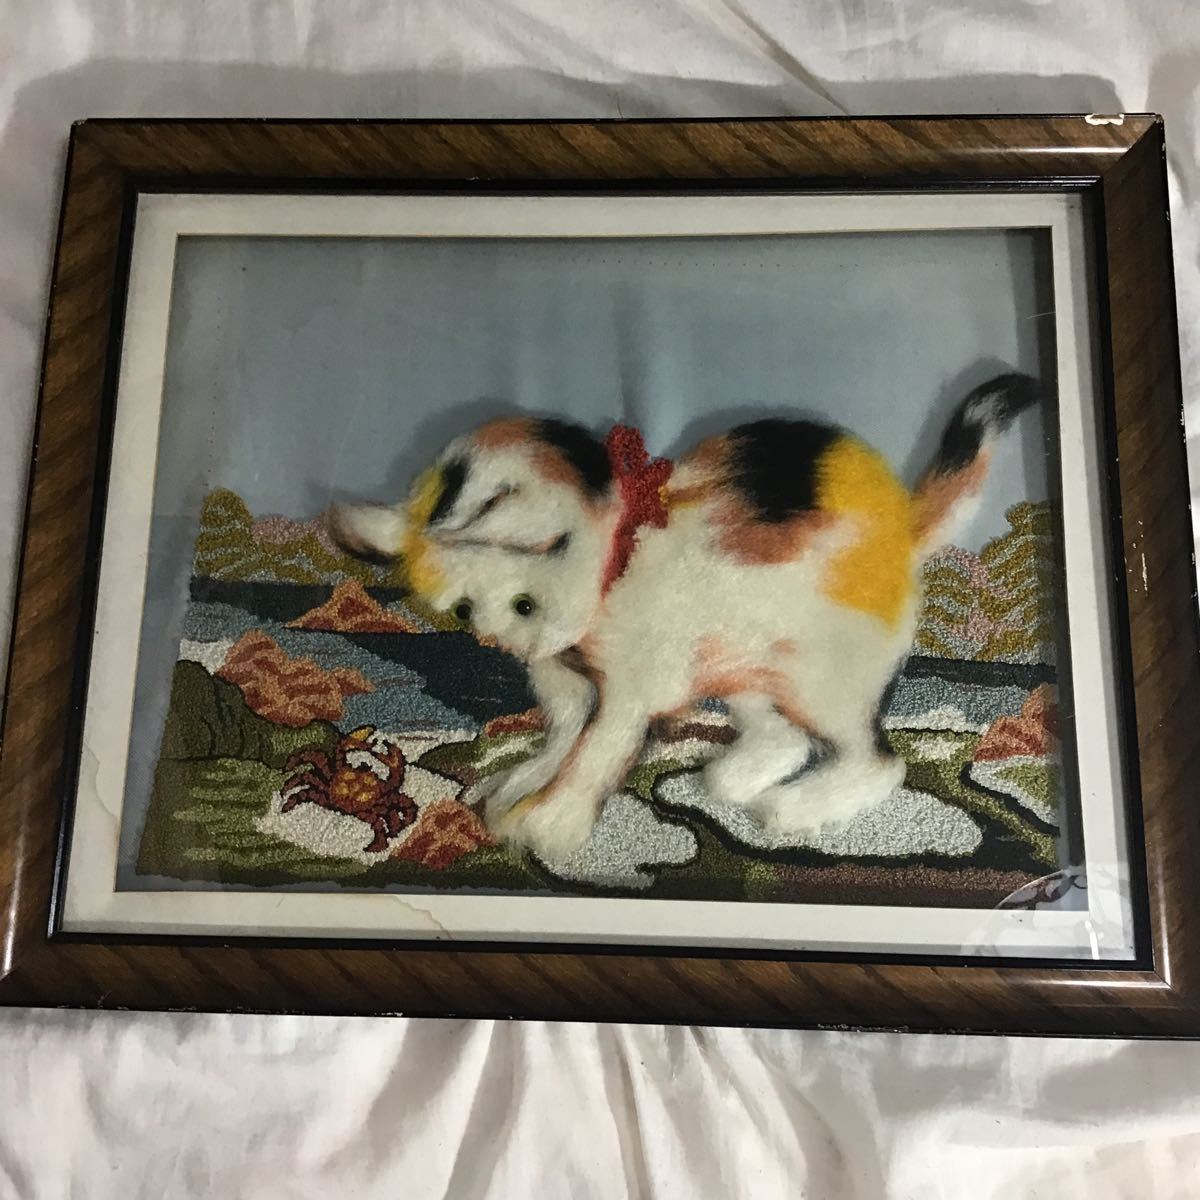 Handicraft art Authentic work Over 500 yen 10% bonus Frame height 39.5 width 49.5 thickness 4cm Made of cat cotton Three-dimensional crab landscape embroidery Handmade Frame multiple scratches No laces Conditional shipping change possible 100, artwork, painting, Hirie, Kirie